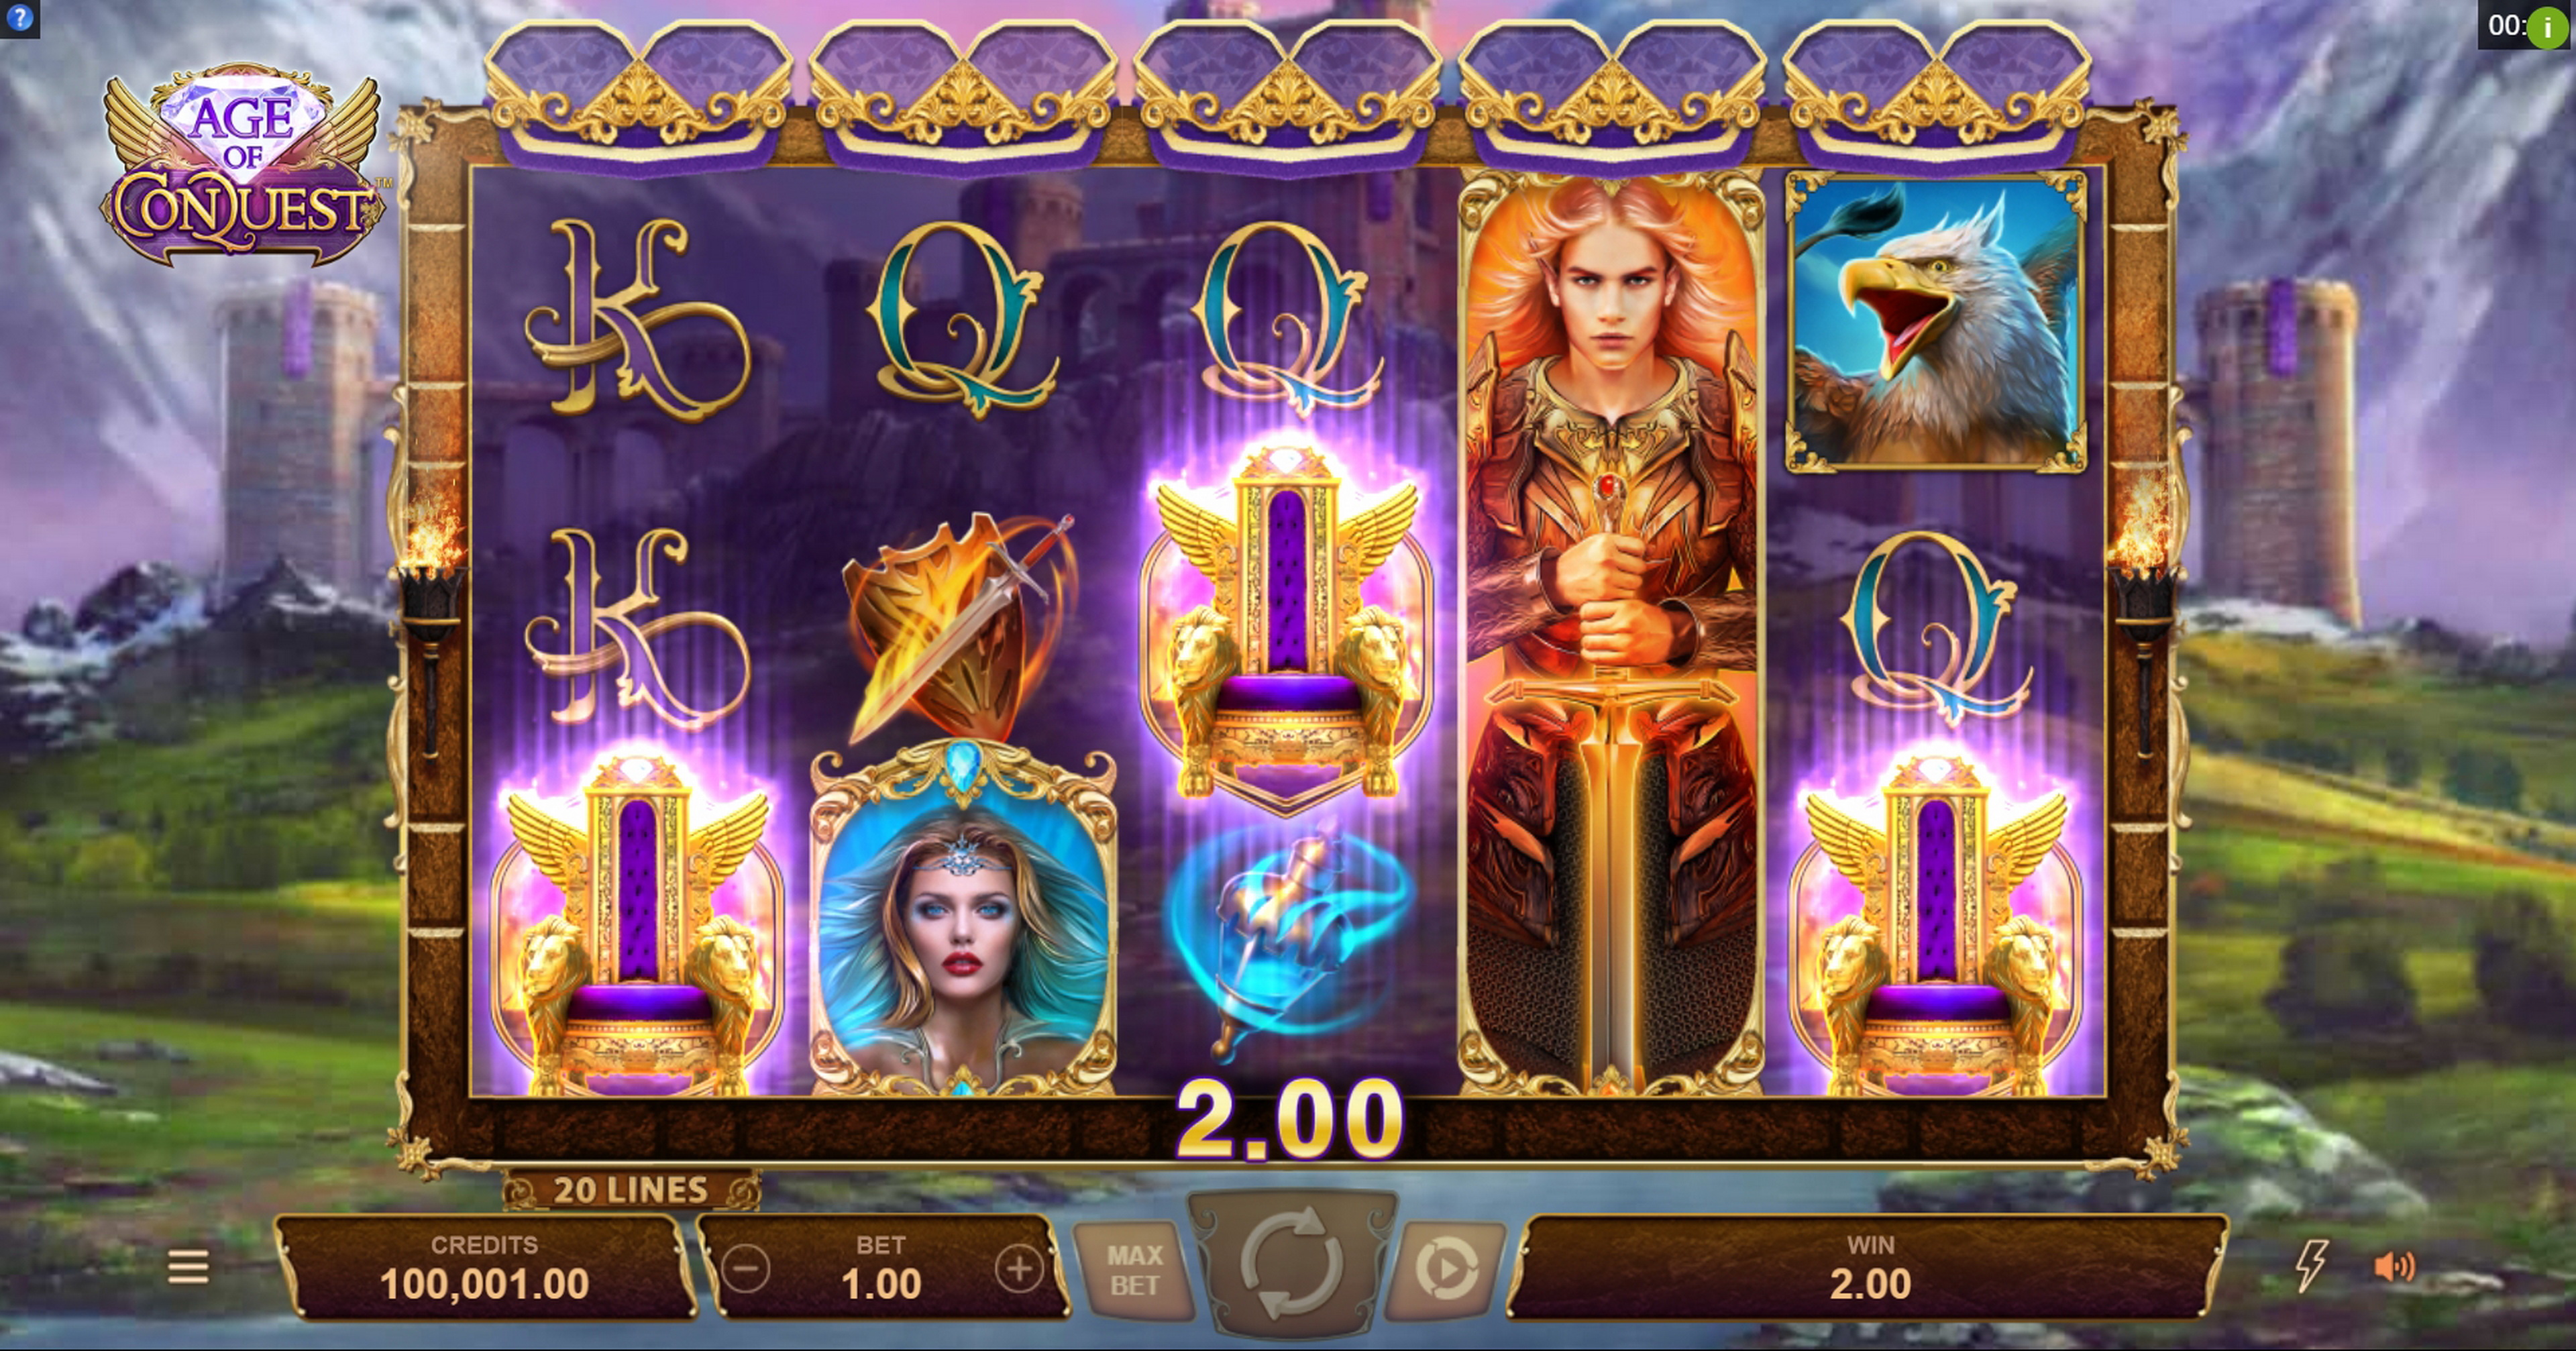 Win Money in Age of Conquest Free Slot Game by Neon Valley Studios